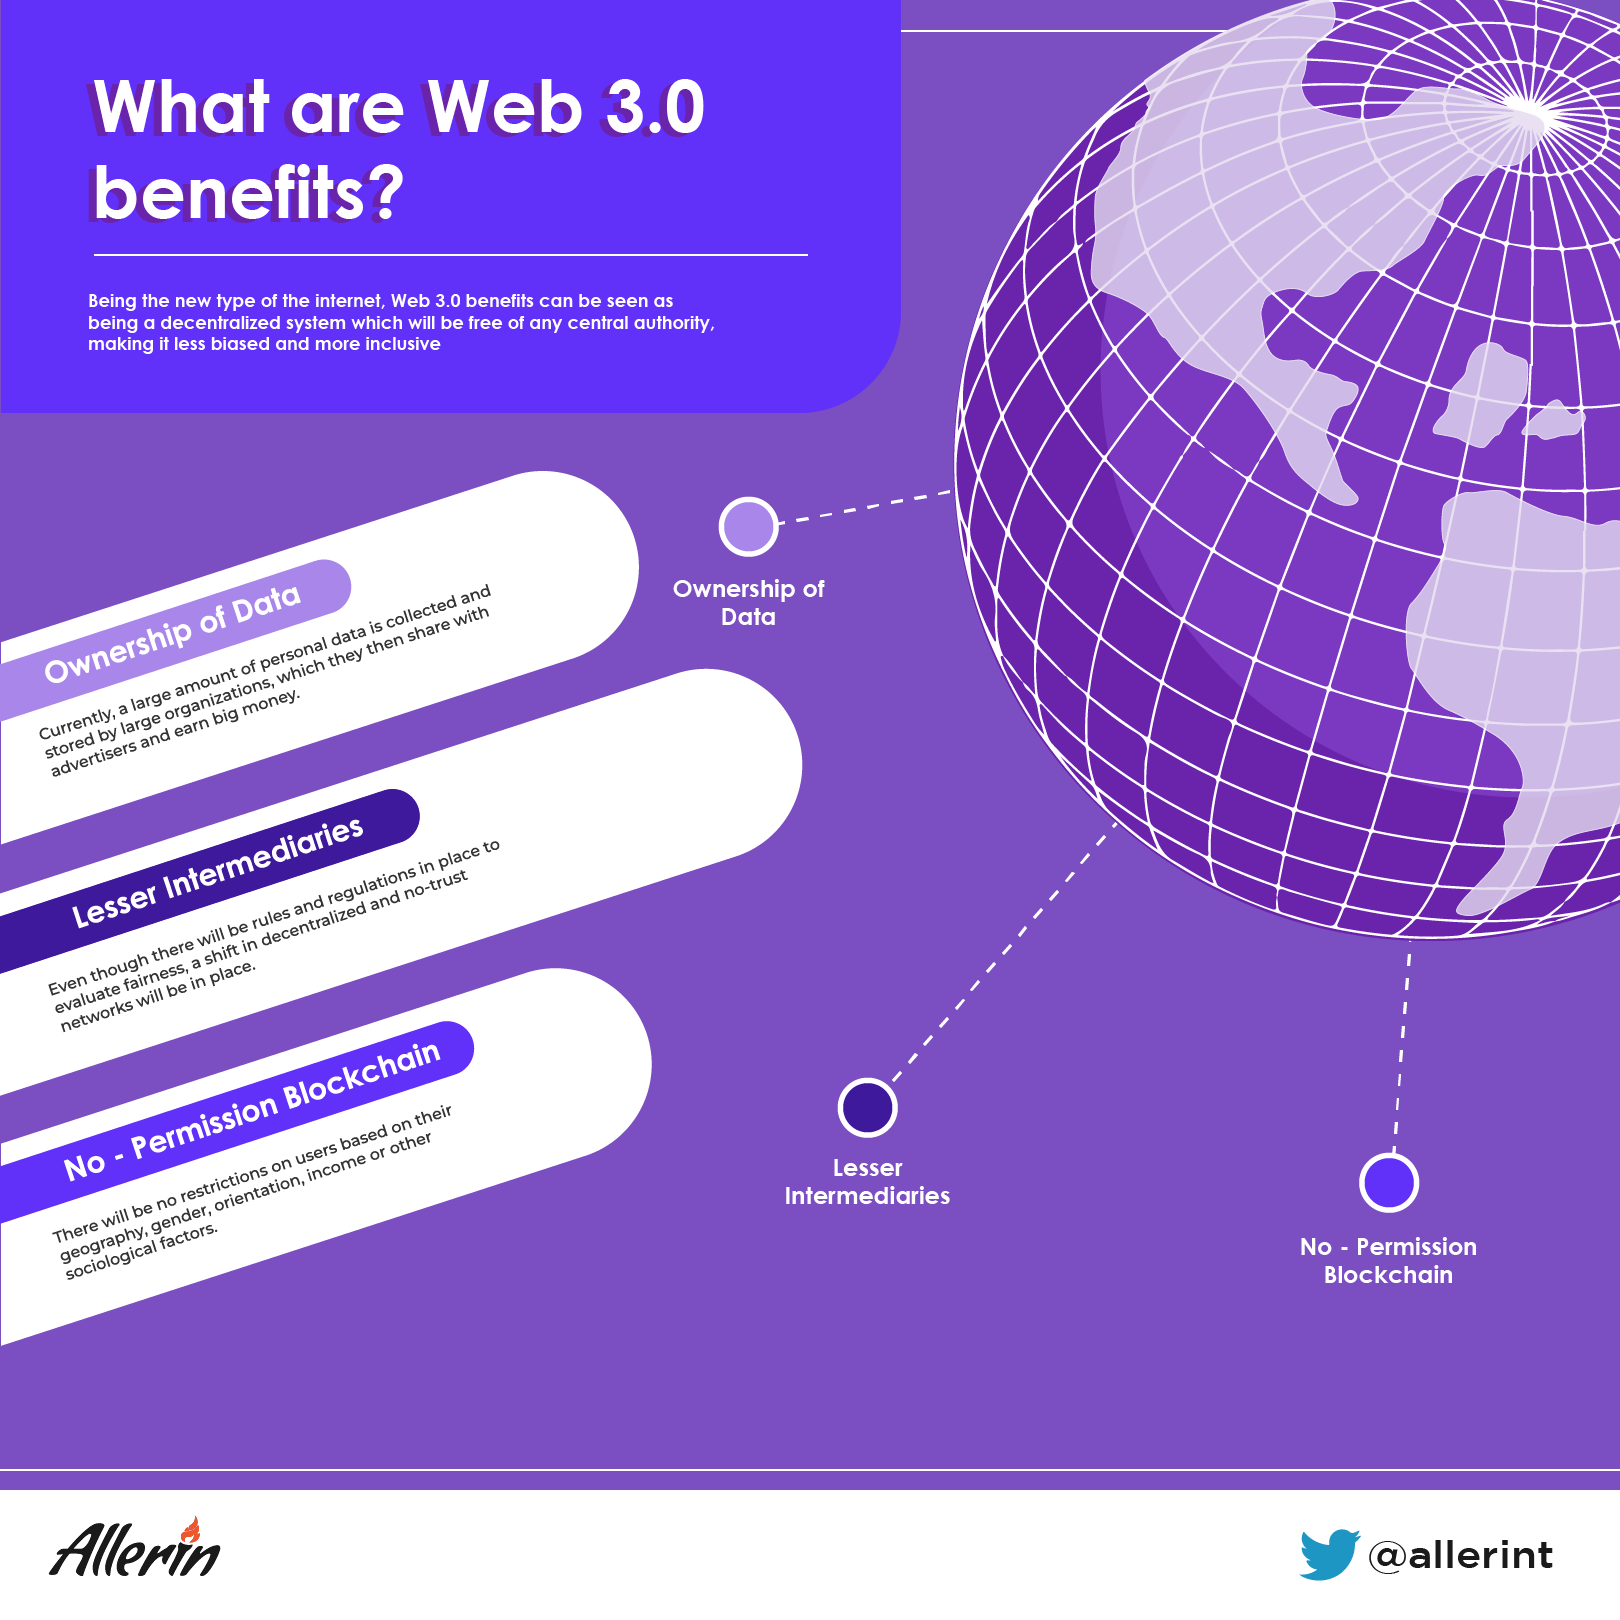 Why is Web 3.0 a big deal?